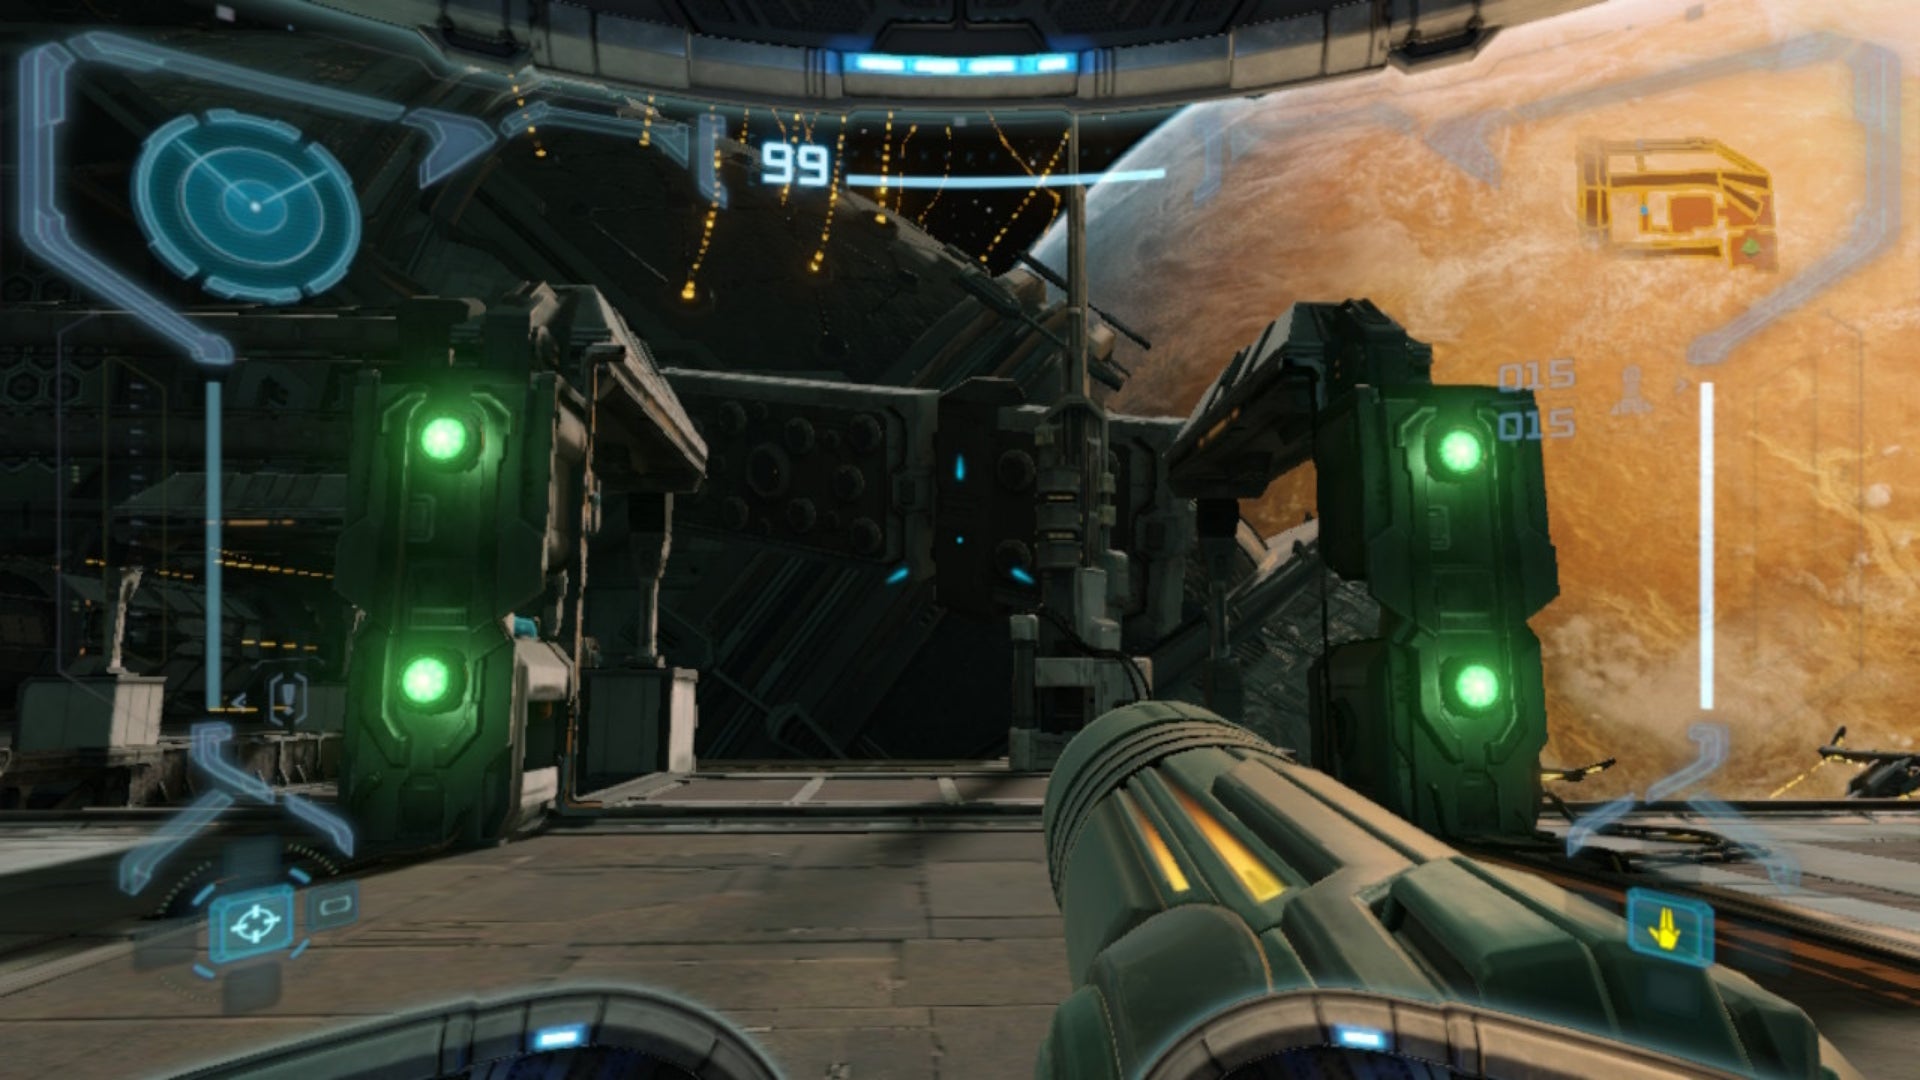 Samus fires at four targets to remove a barrier in Metroid Prime Remastered